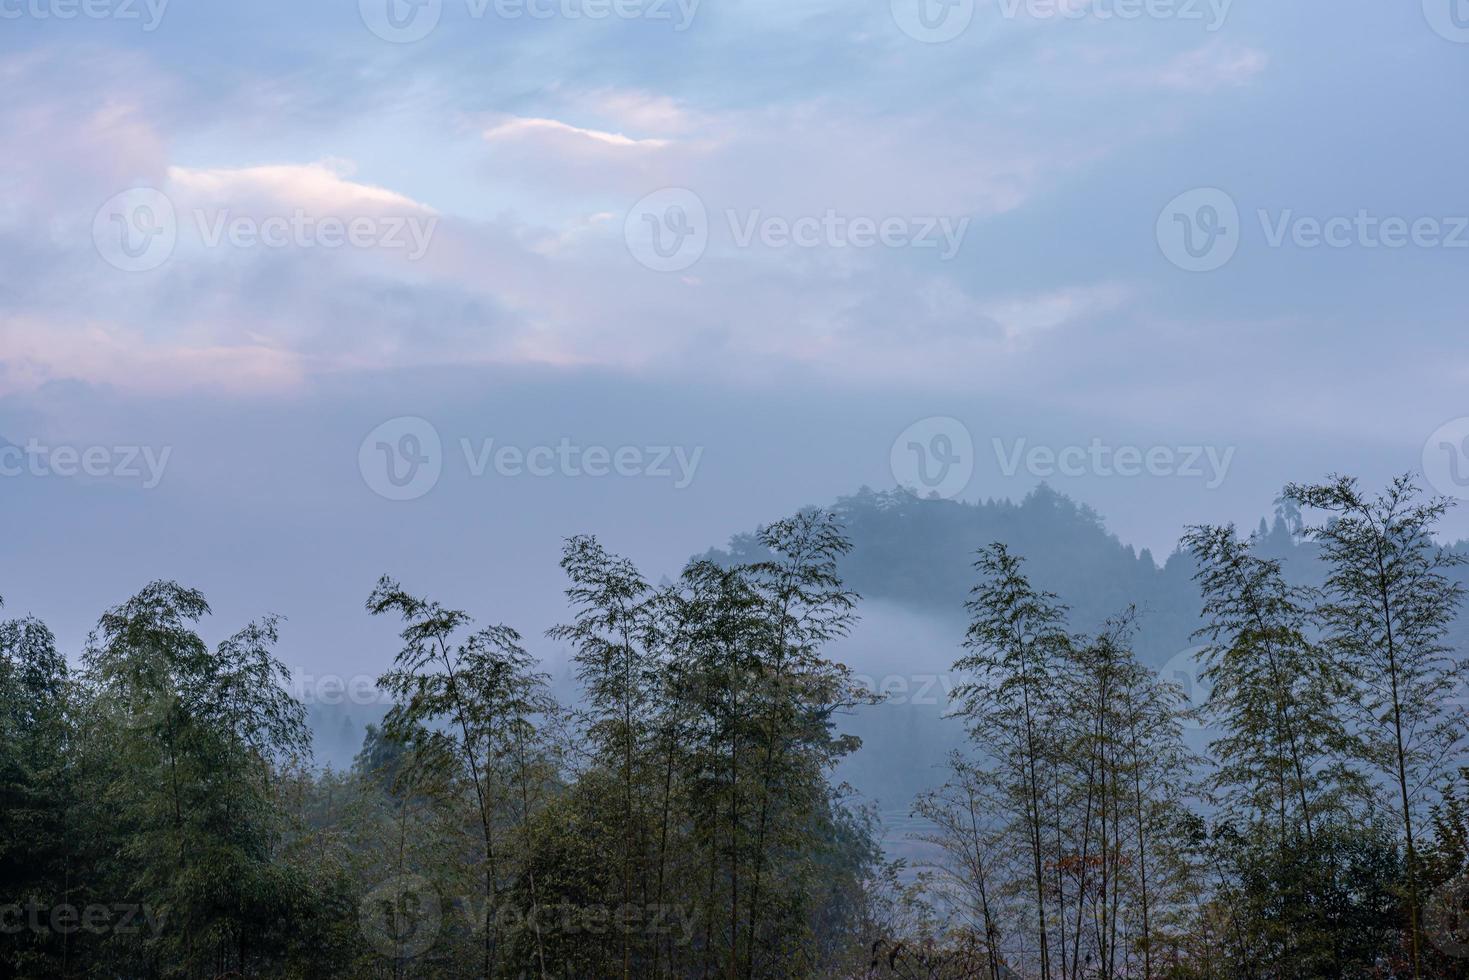 Tea mountain and forest in morning fog photo